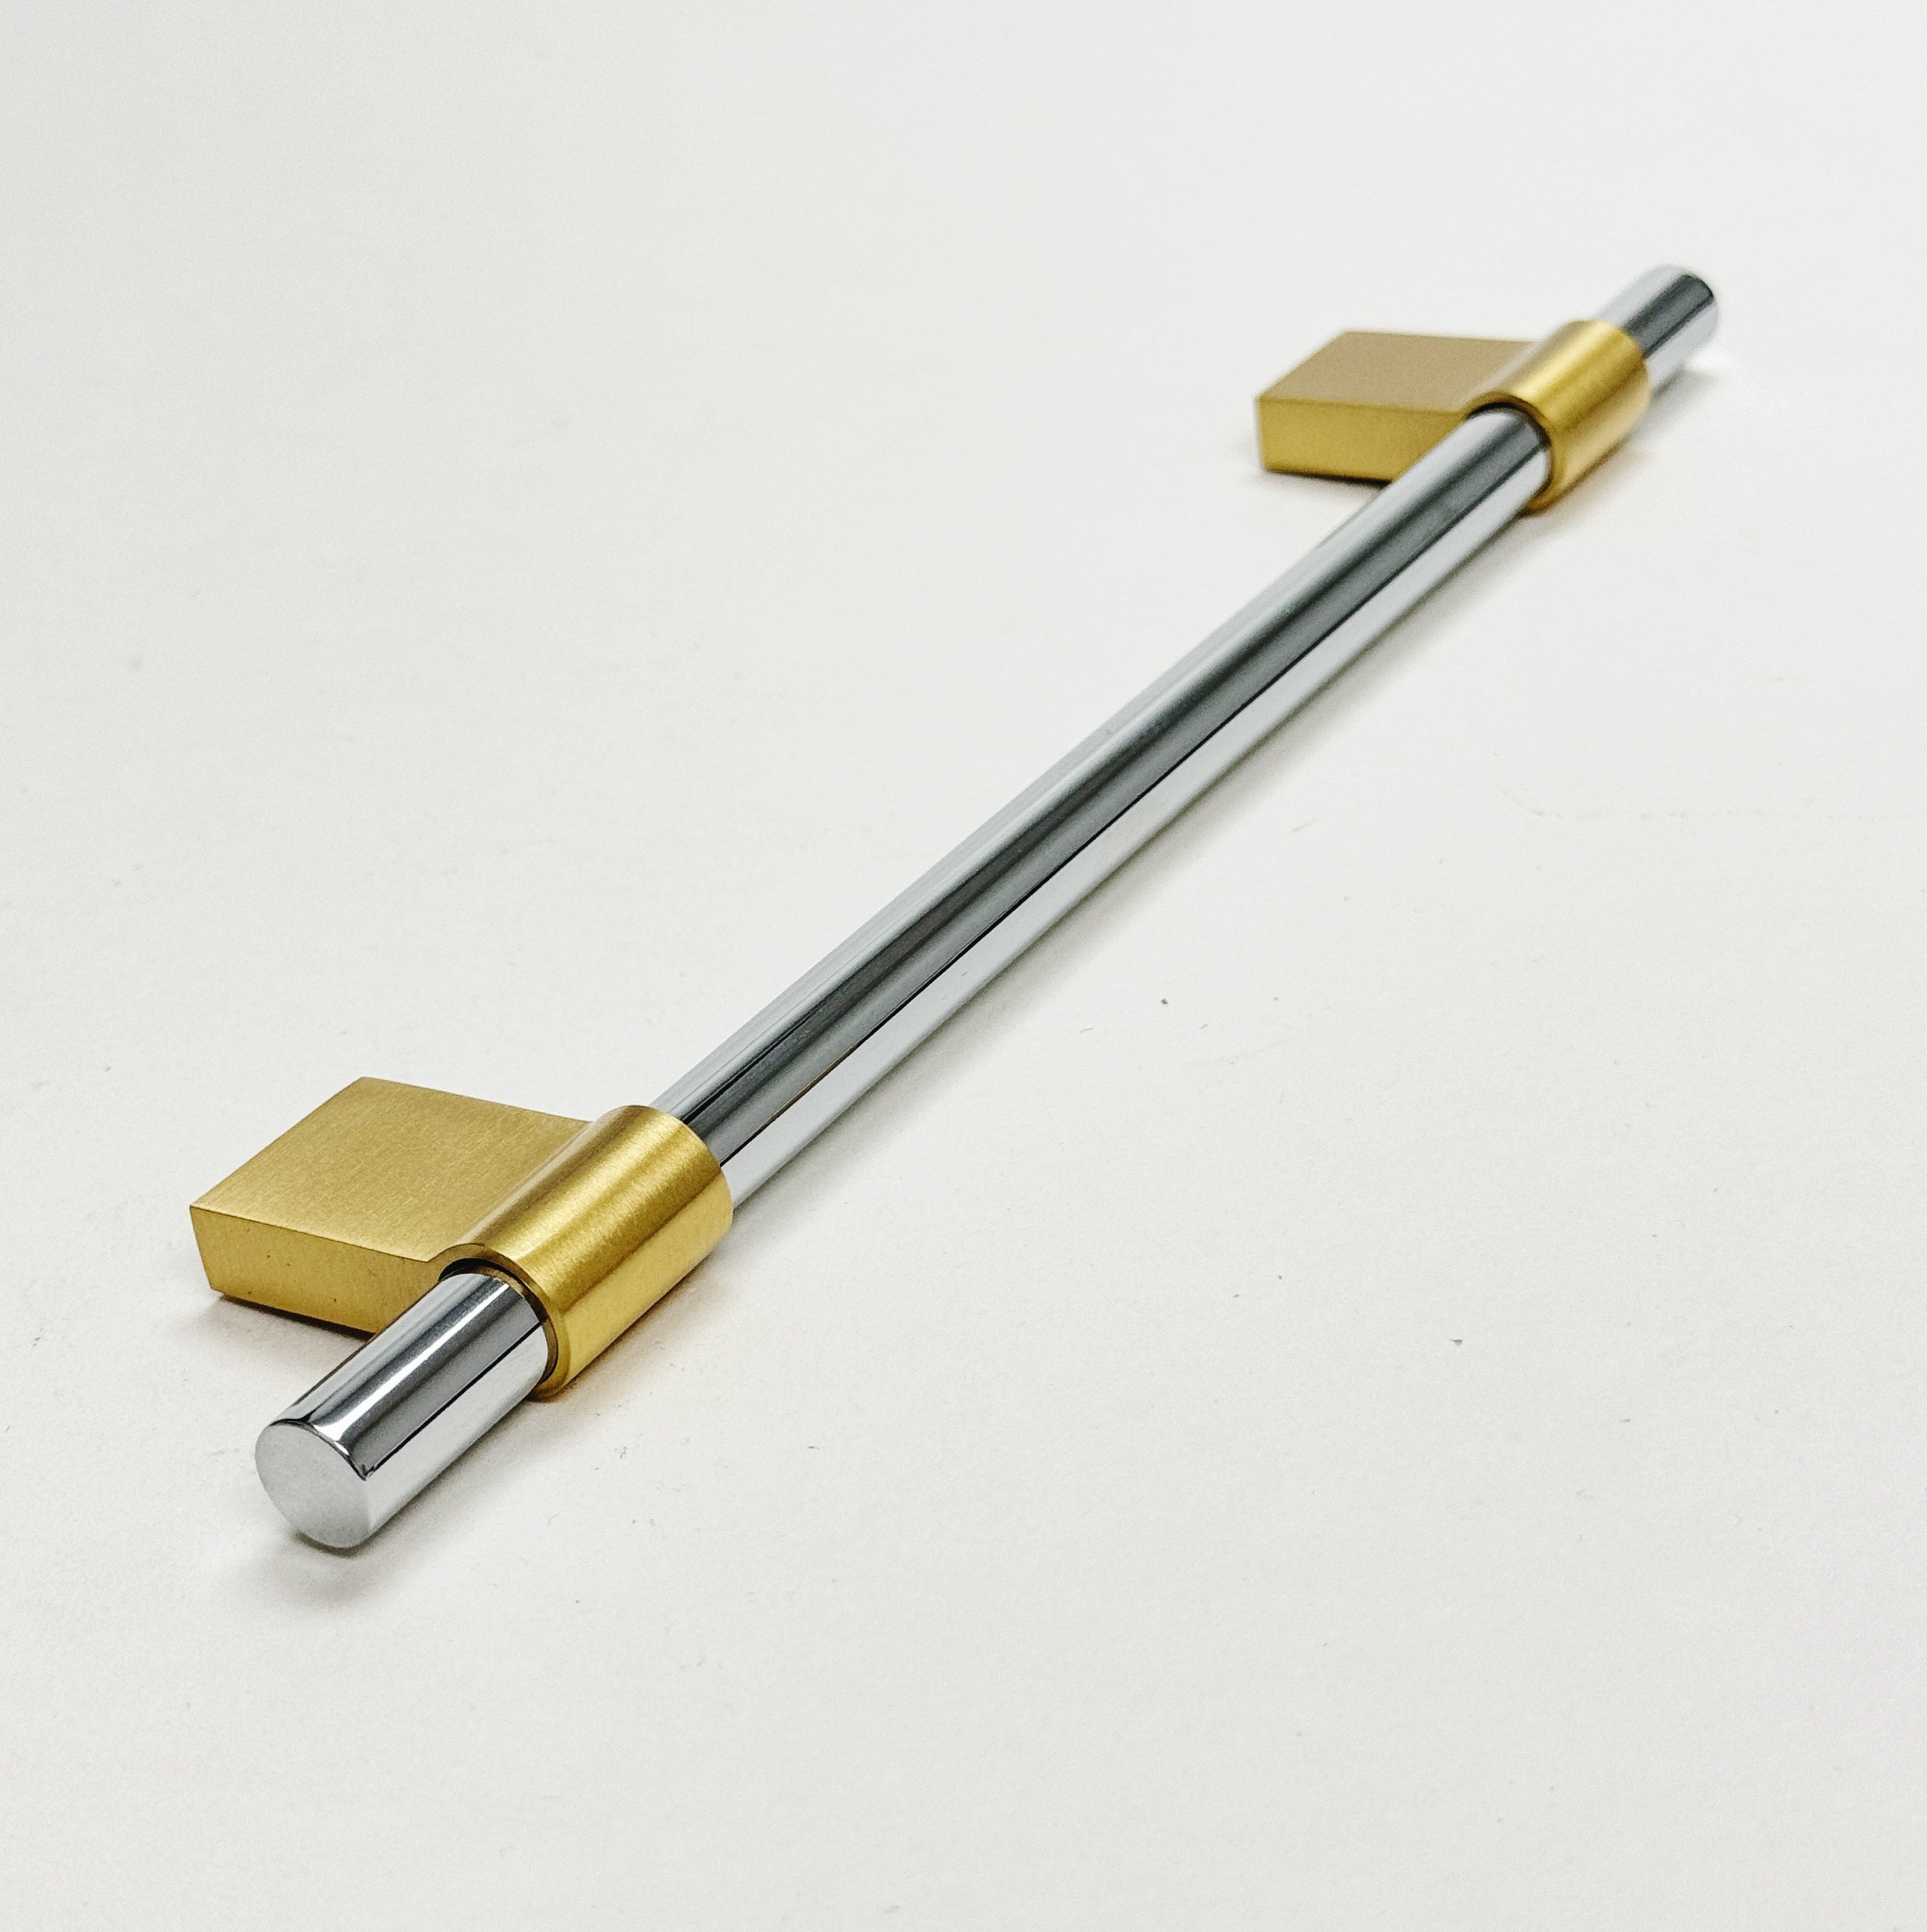 Line Brass and Nickel Cabinet Knob and Drawer Pulls - Industry Hardware